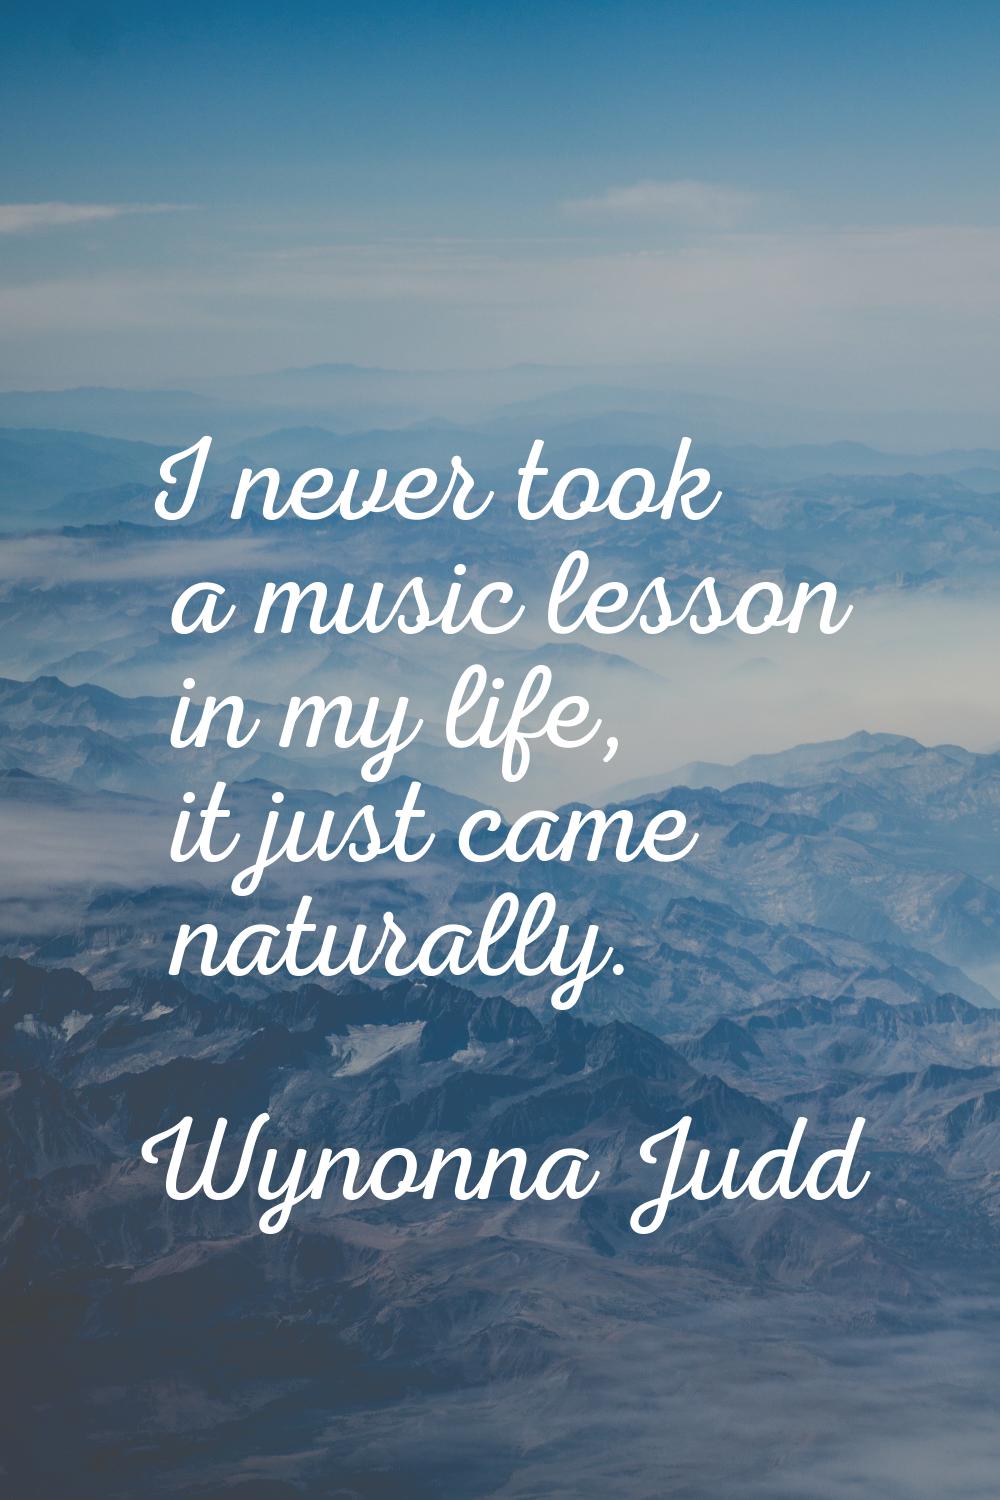 I never took a music lesson in my life, it just came naturally.